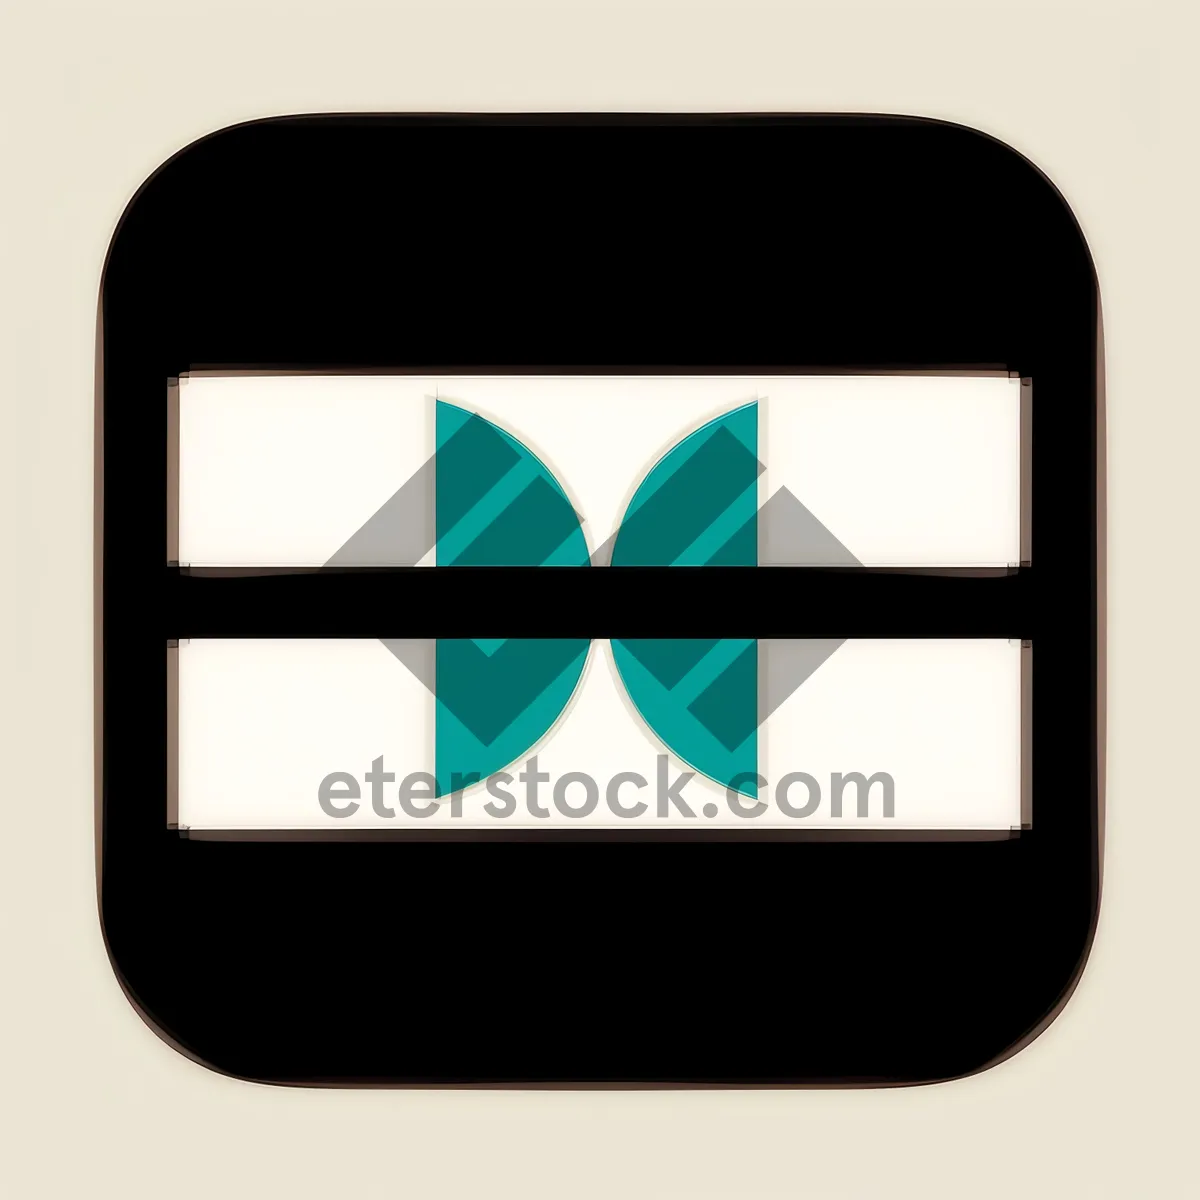 Picture of Shiny Square Web Button with Metallic 3D Effect